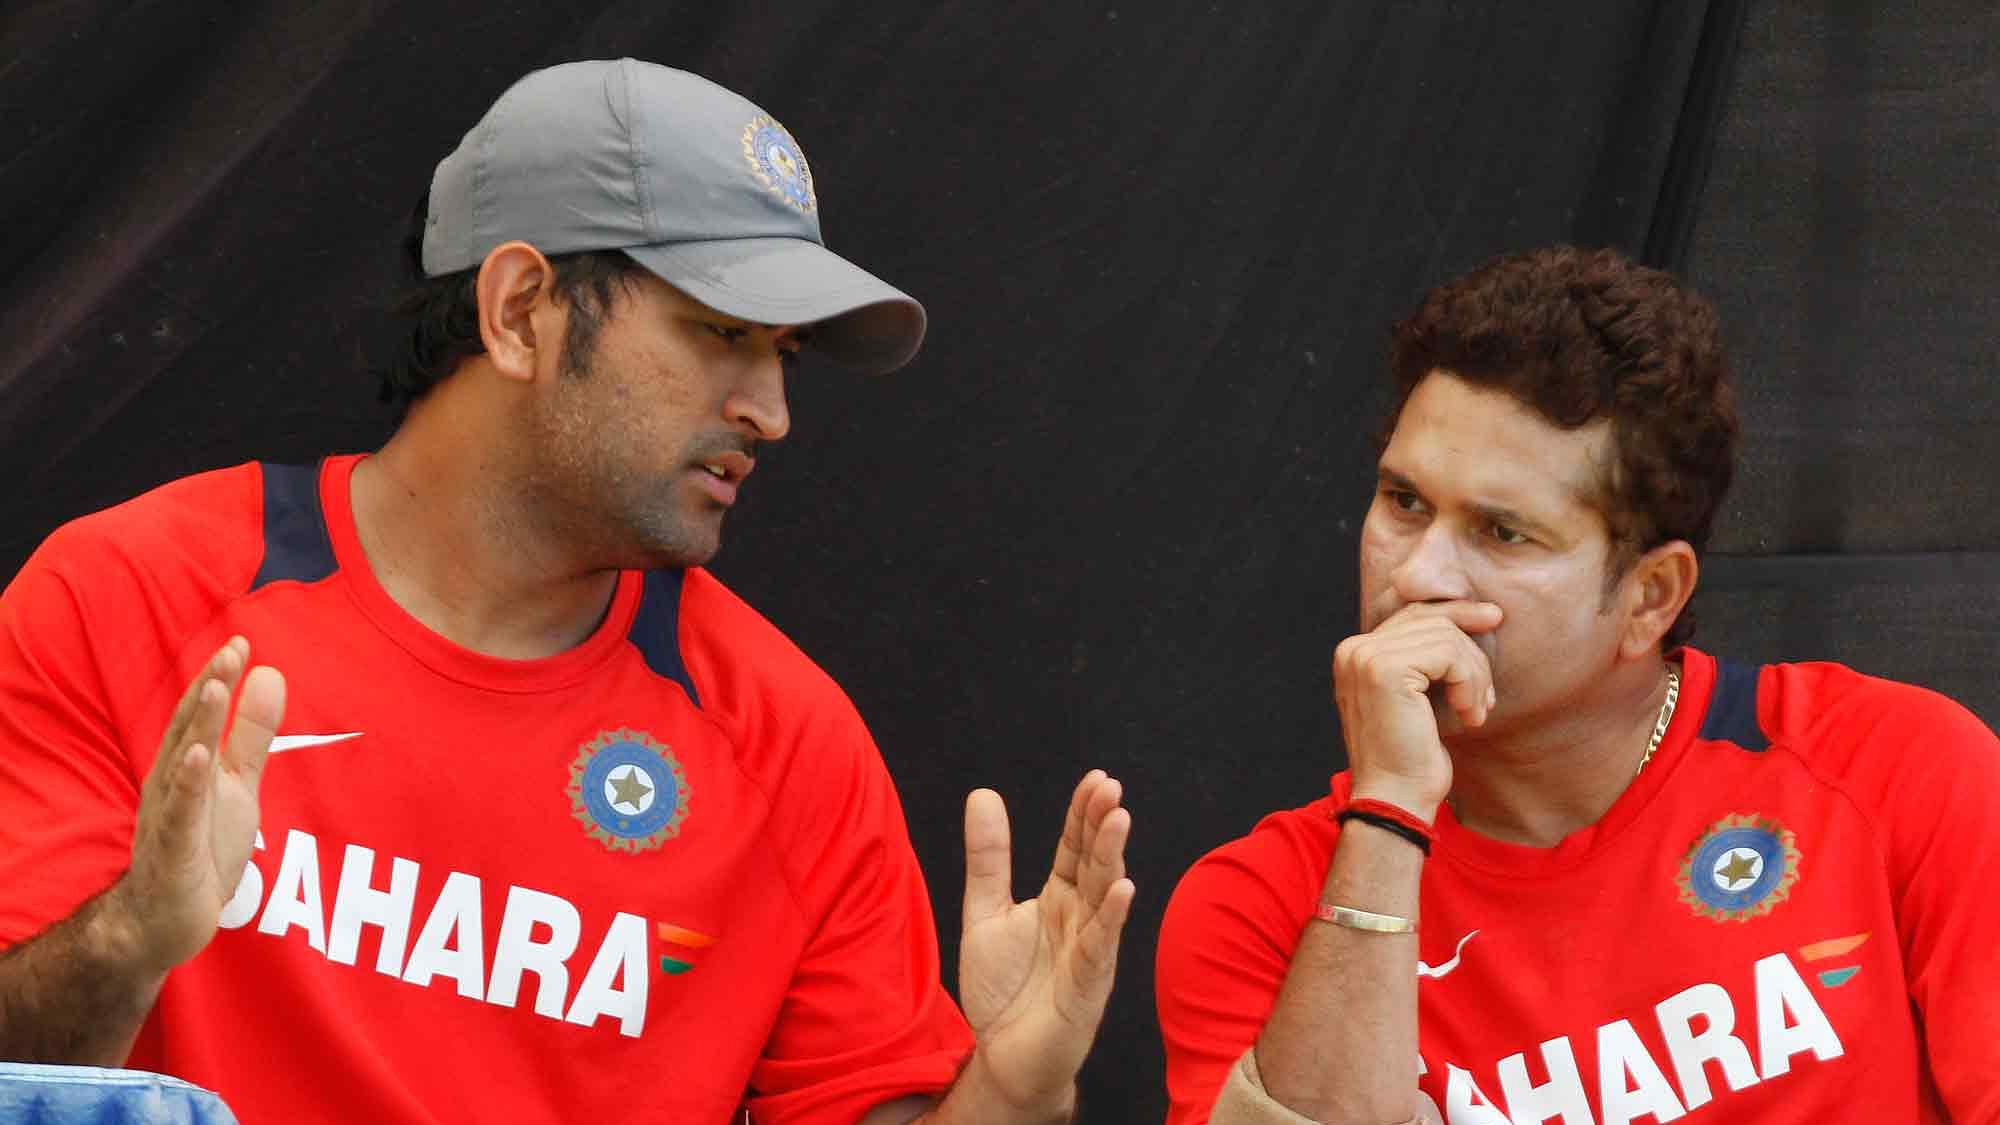 File picture of MS Dhoni and Sachin Tendulkar during a training session.